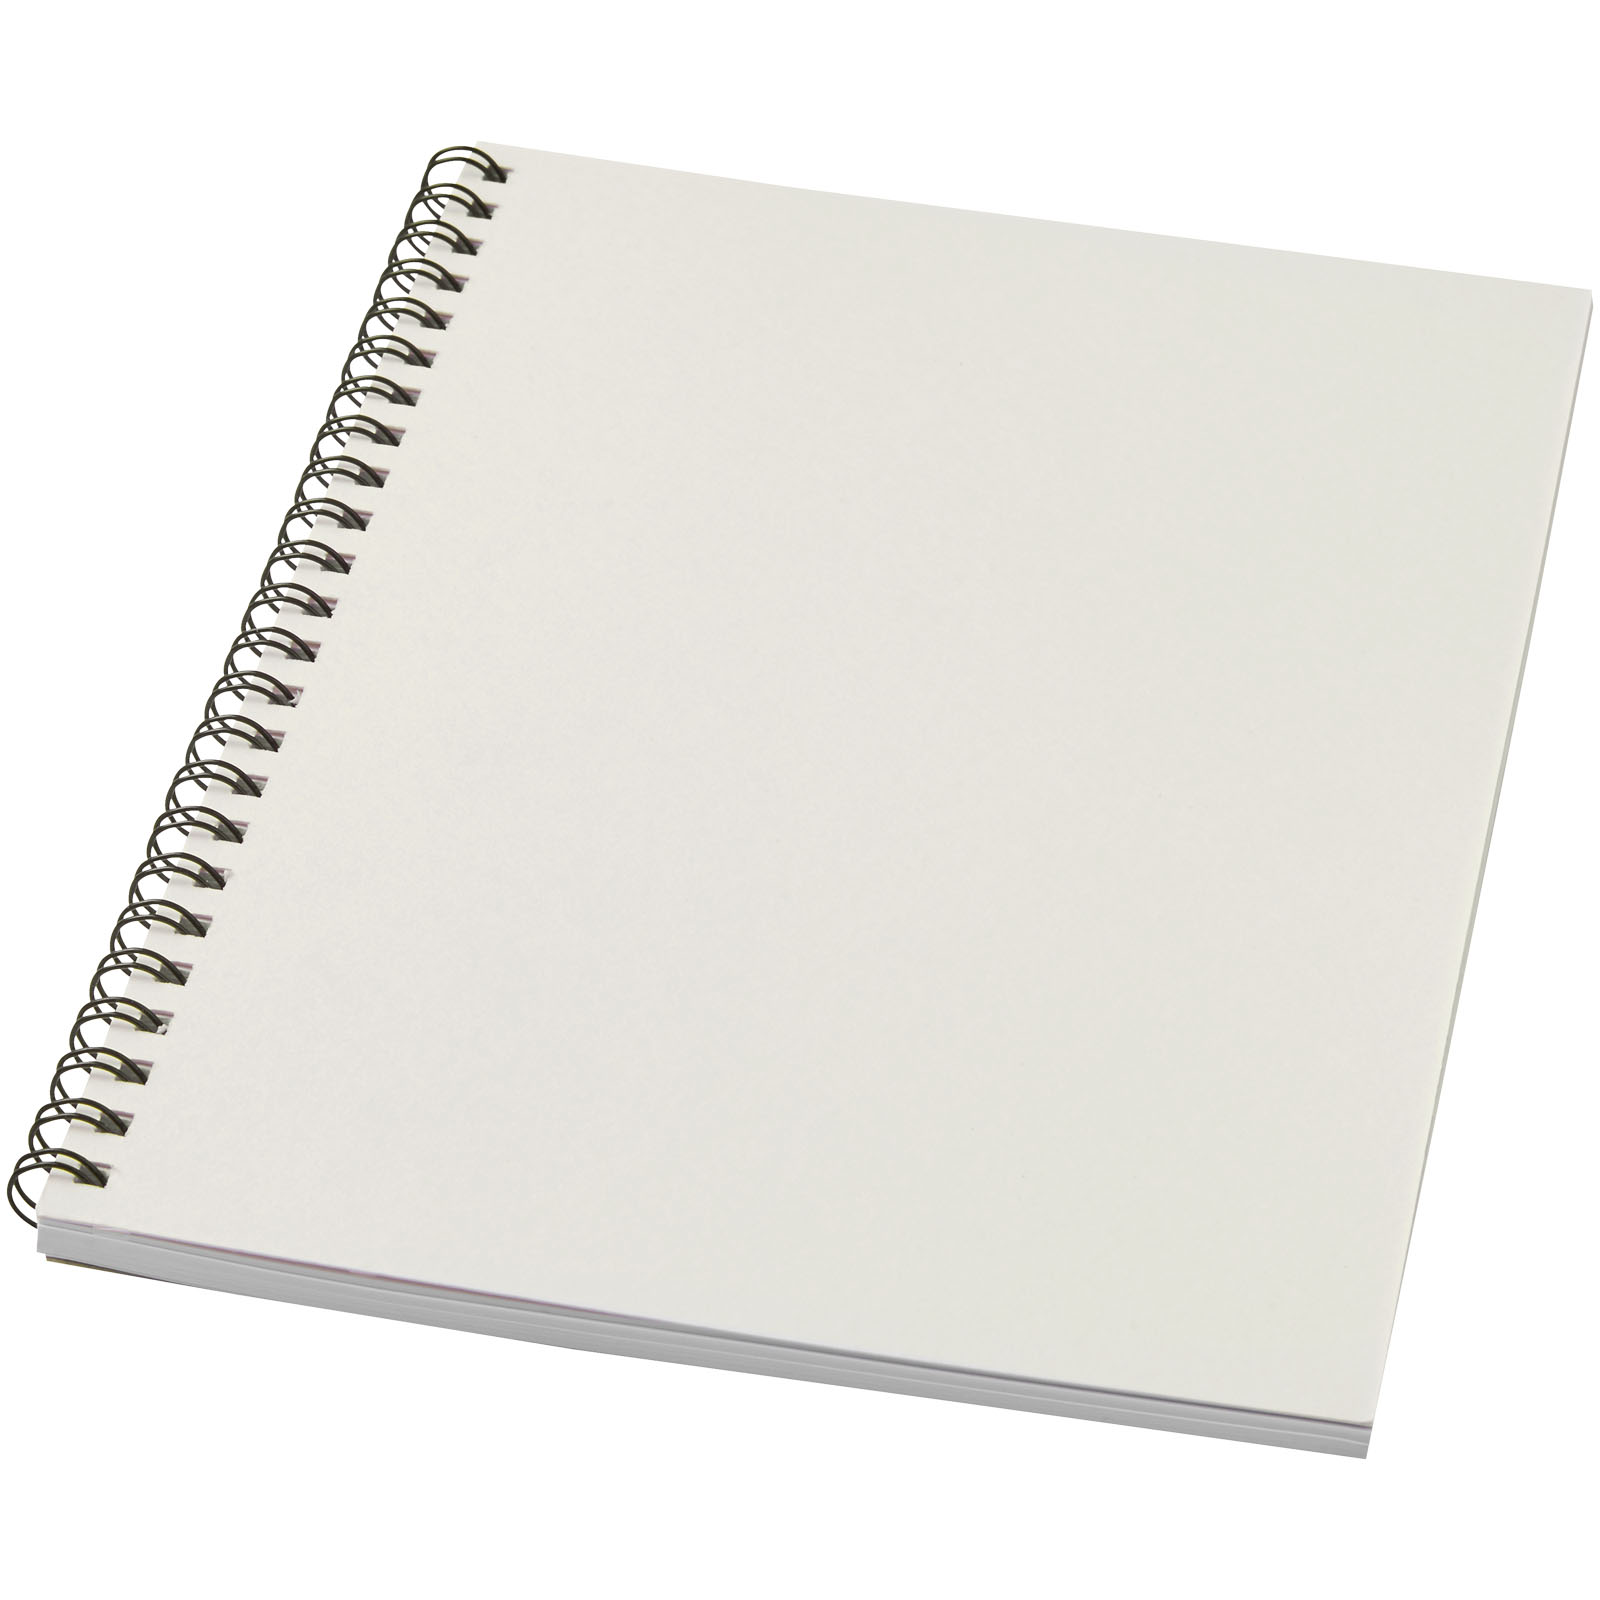 Advertising Soft cover notebooks - Desk-Mate® A5 colour spiral notebook